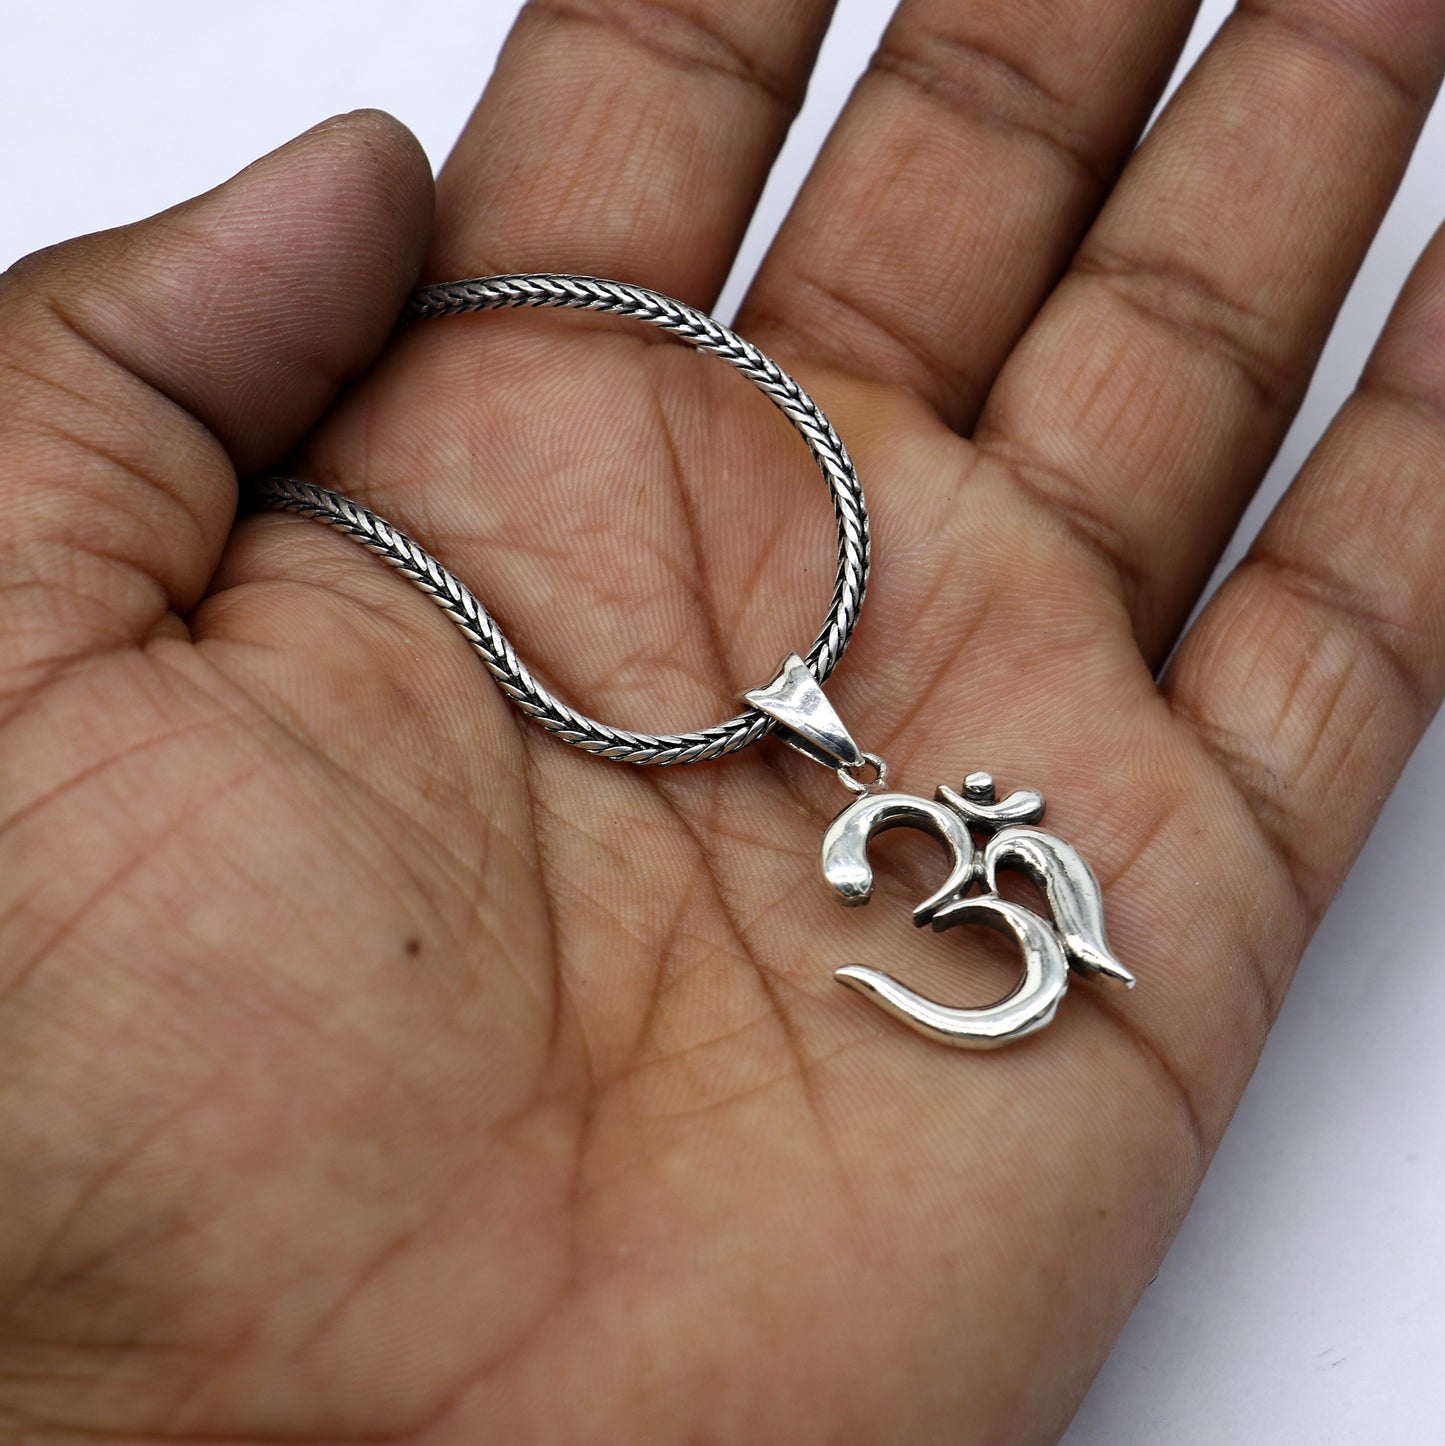 925 sterling silver handmade Divine 'Aum' OM pendant, amazing stylish good luck pendant exclusive jewelry tribal jewelry NSP682 - TRIBAL ORNAMENTS